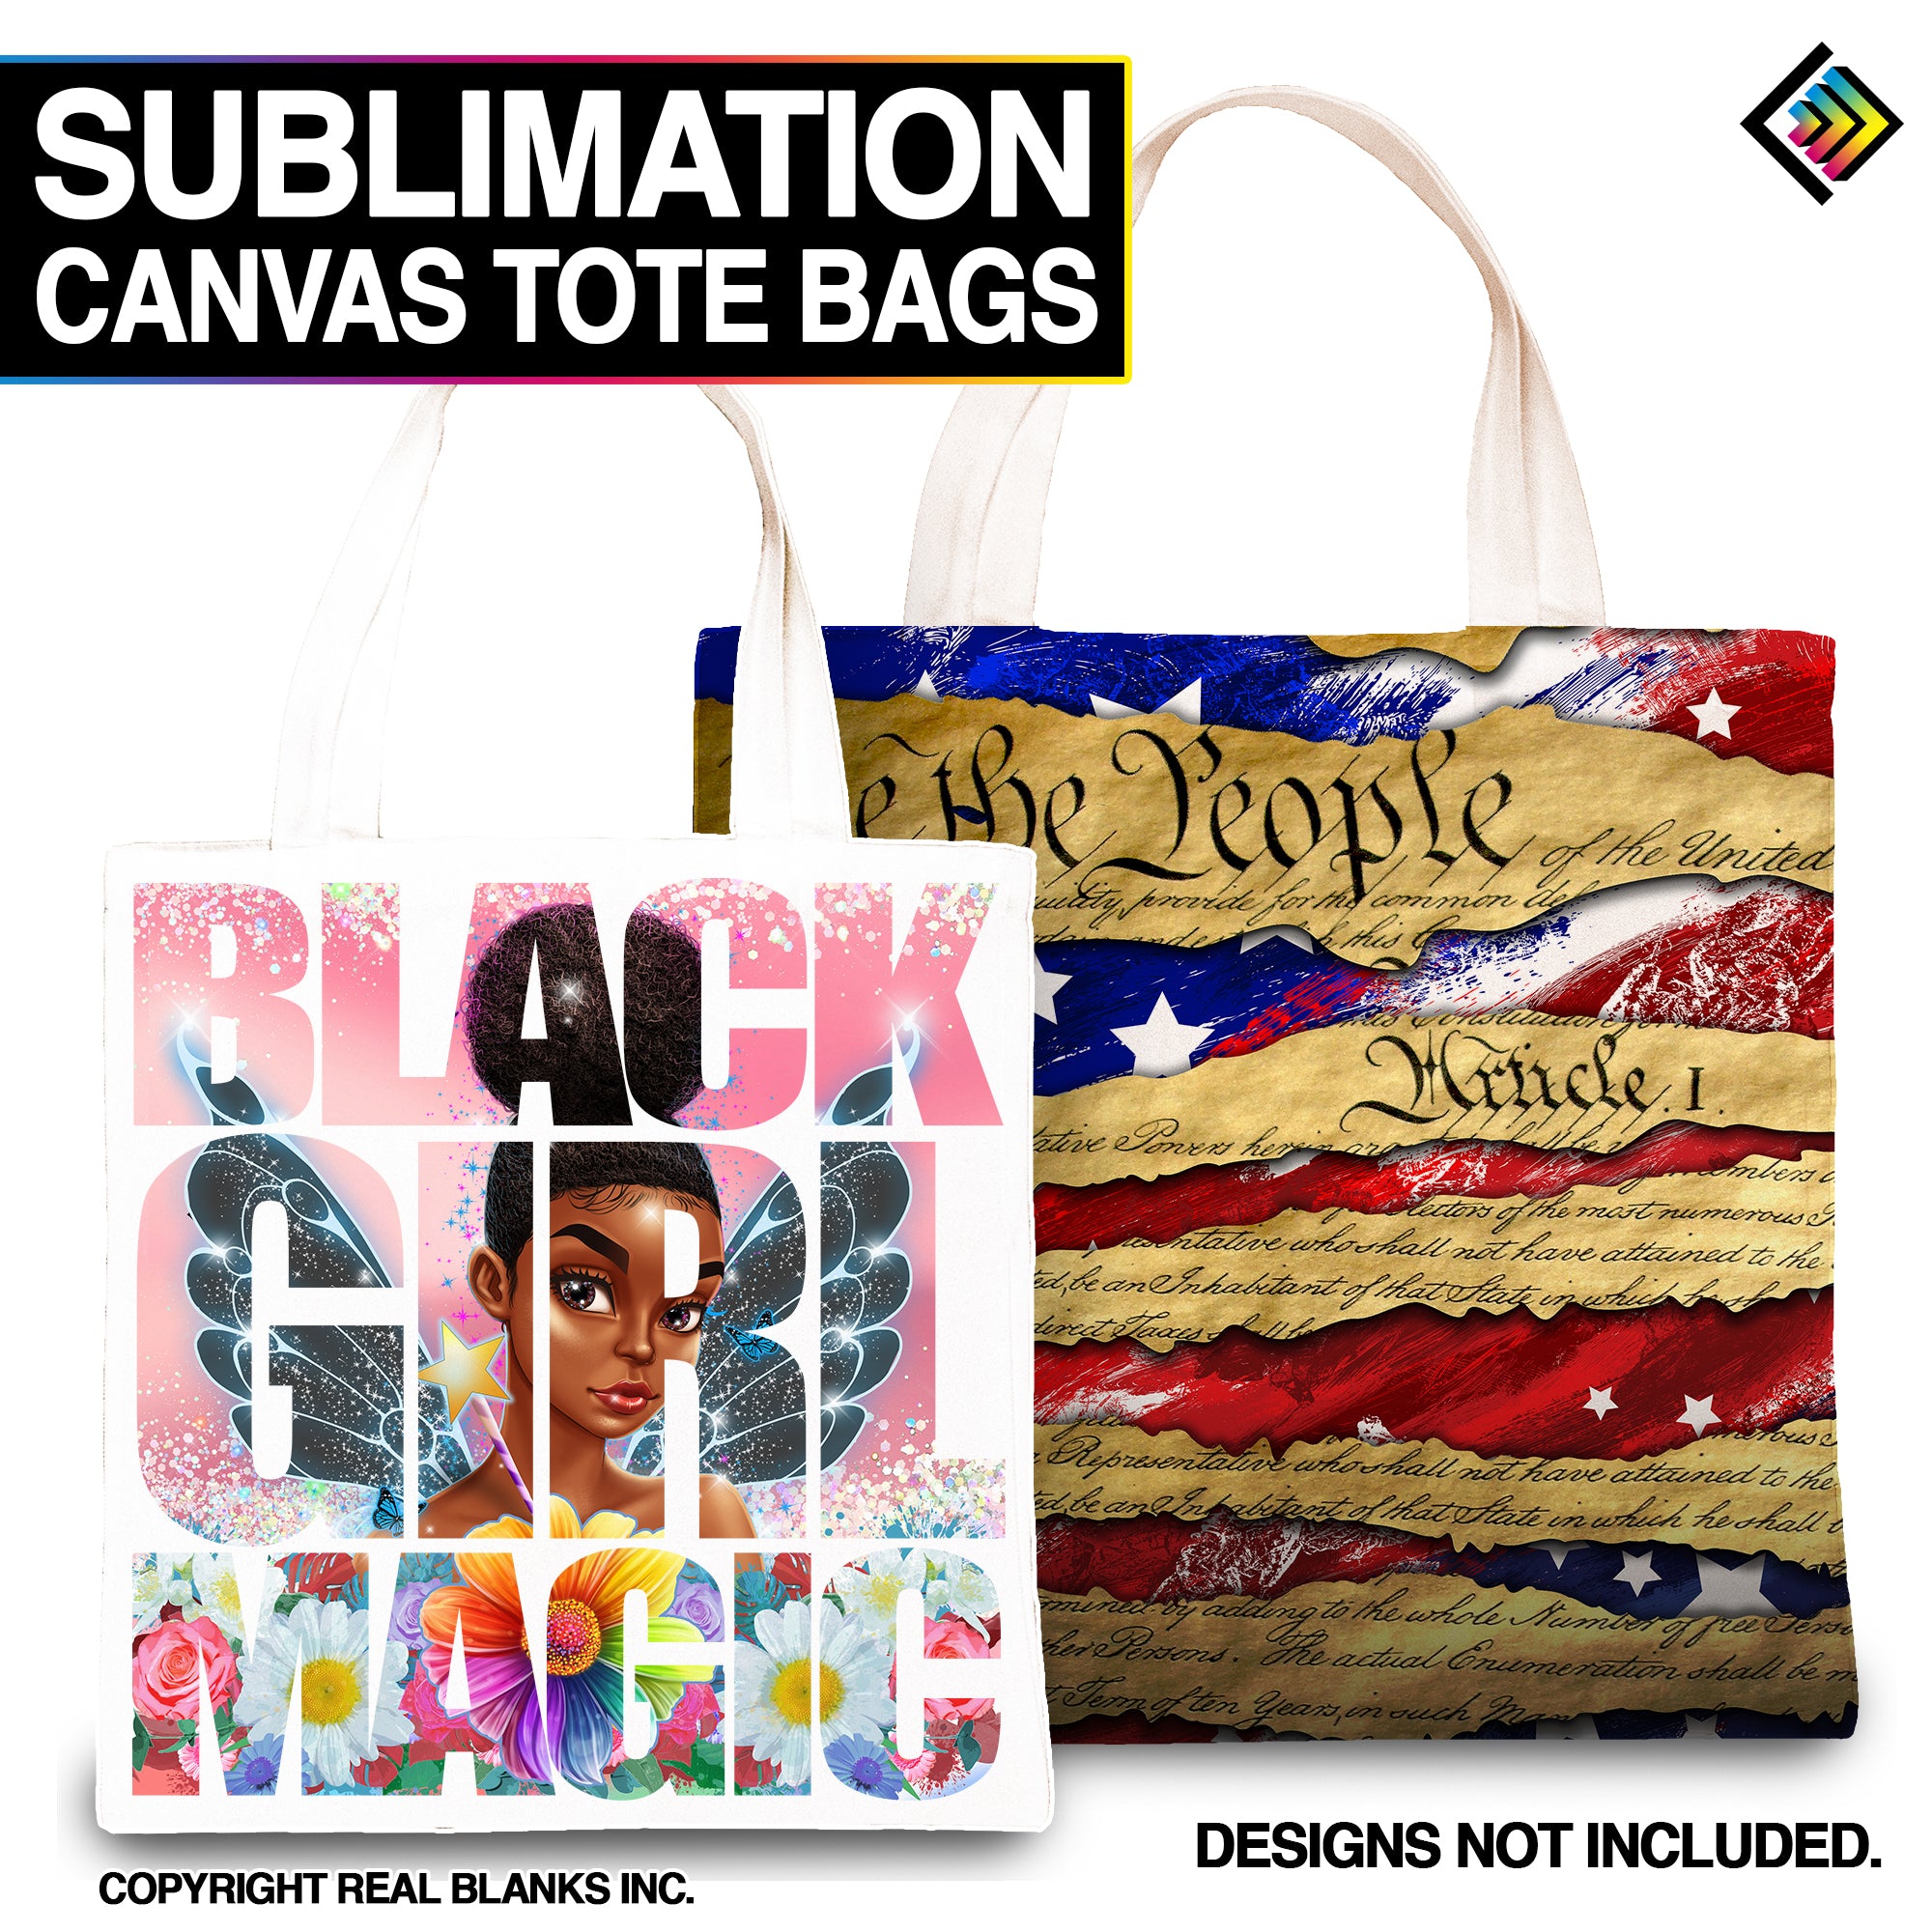 Polyester Canvas For Sublimation - POLYESTER CANVAS FABRIC Manufacturer  from Surat